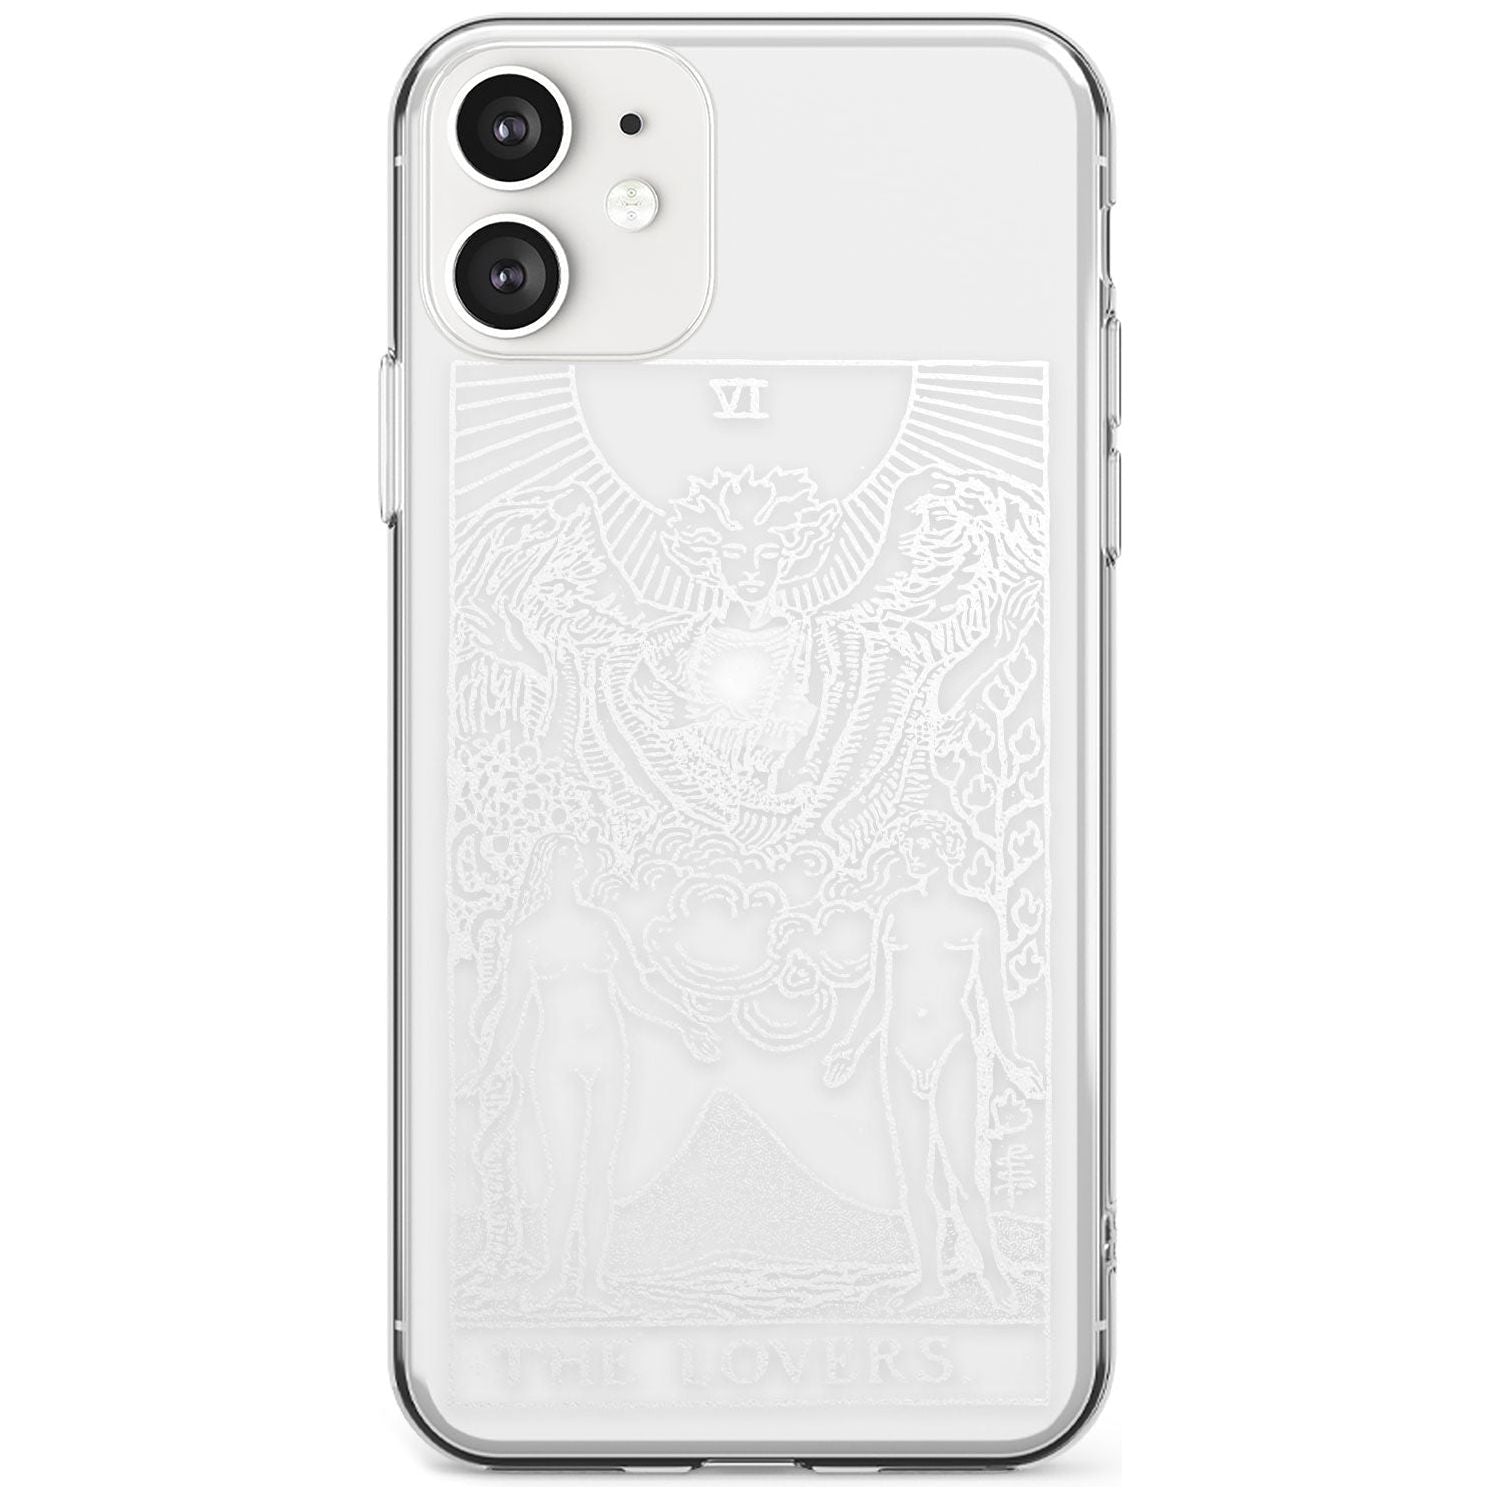 The Lovers Tarot Card - White Transparent Black Impact Phone Case for iPhone 11